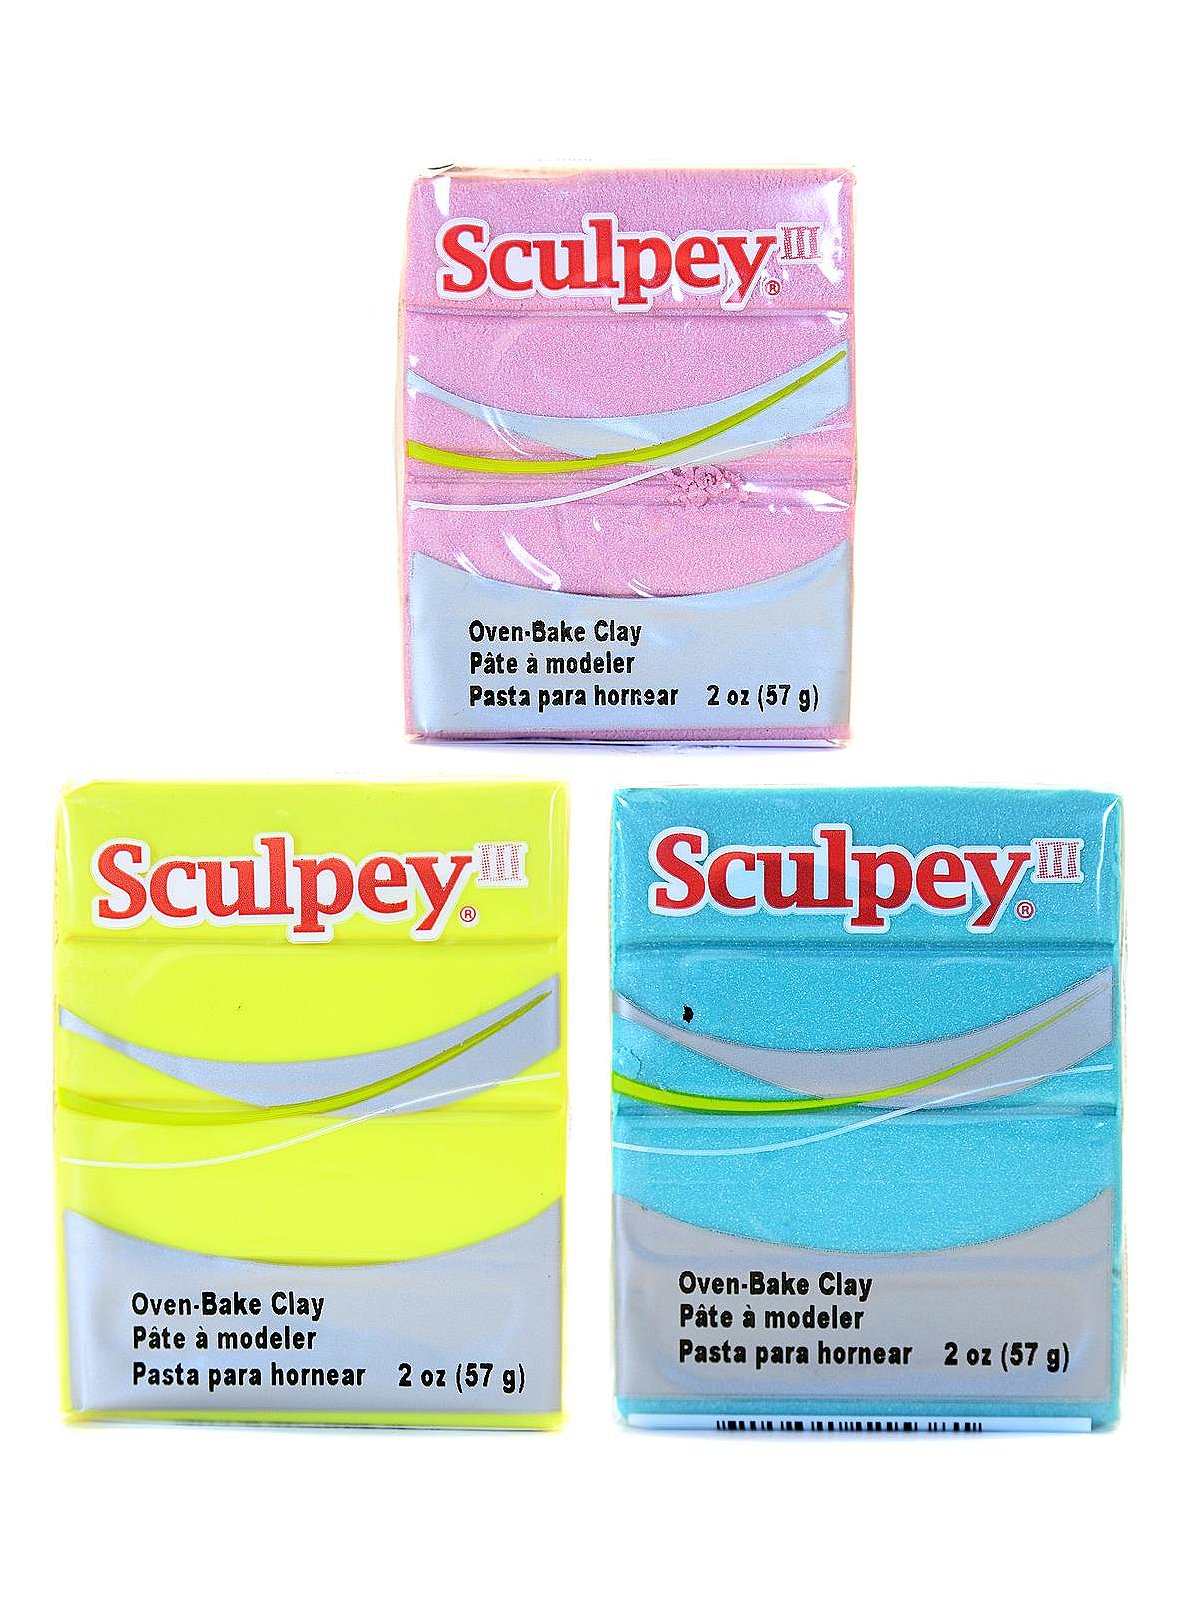 Sculpey, Sculpty, Fimo, Polymer Clay - Which is it?